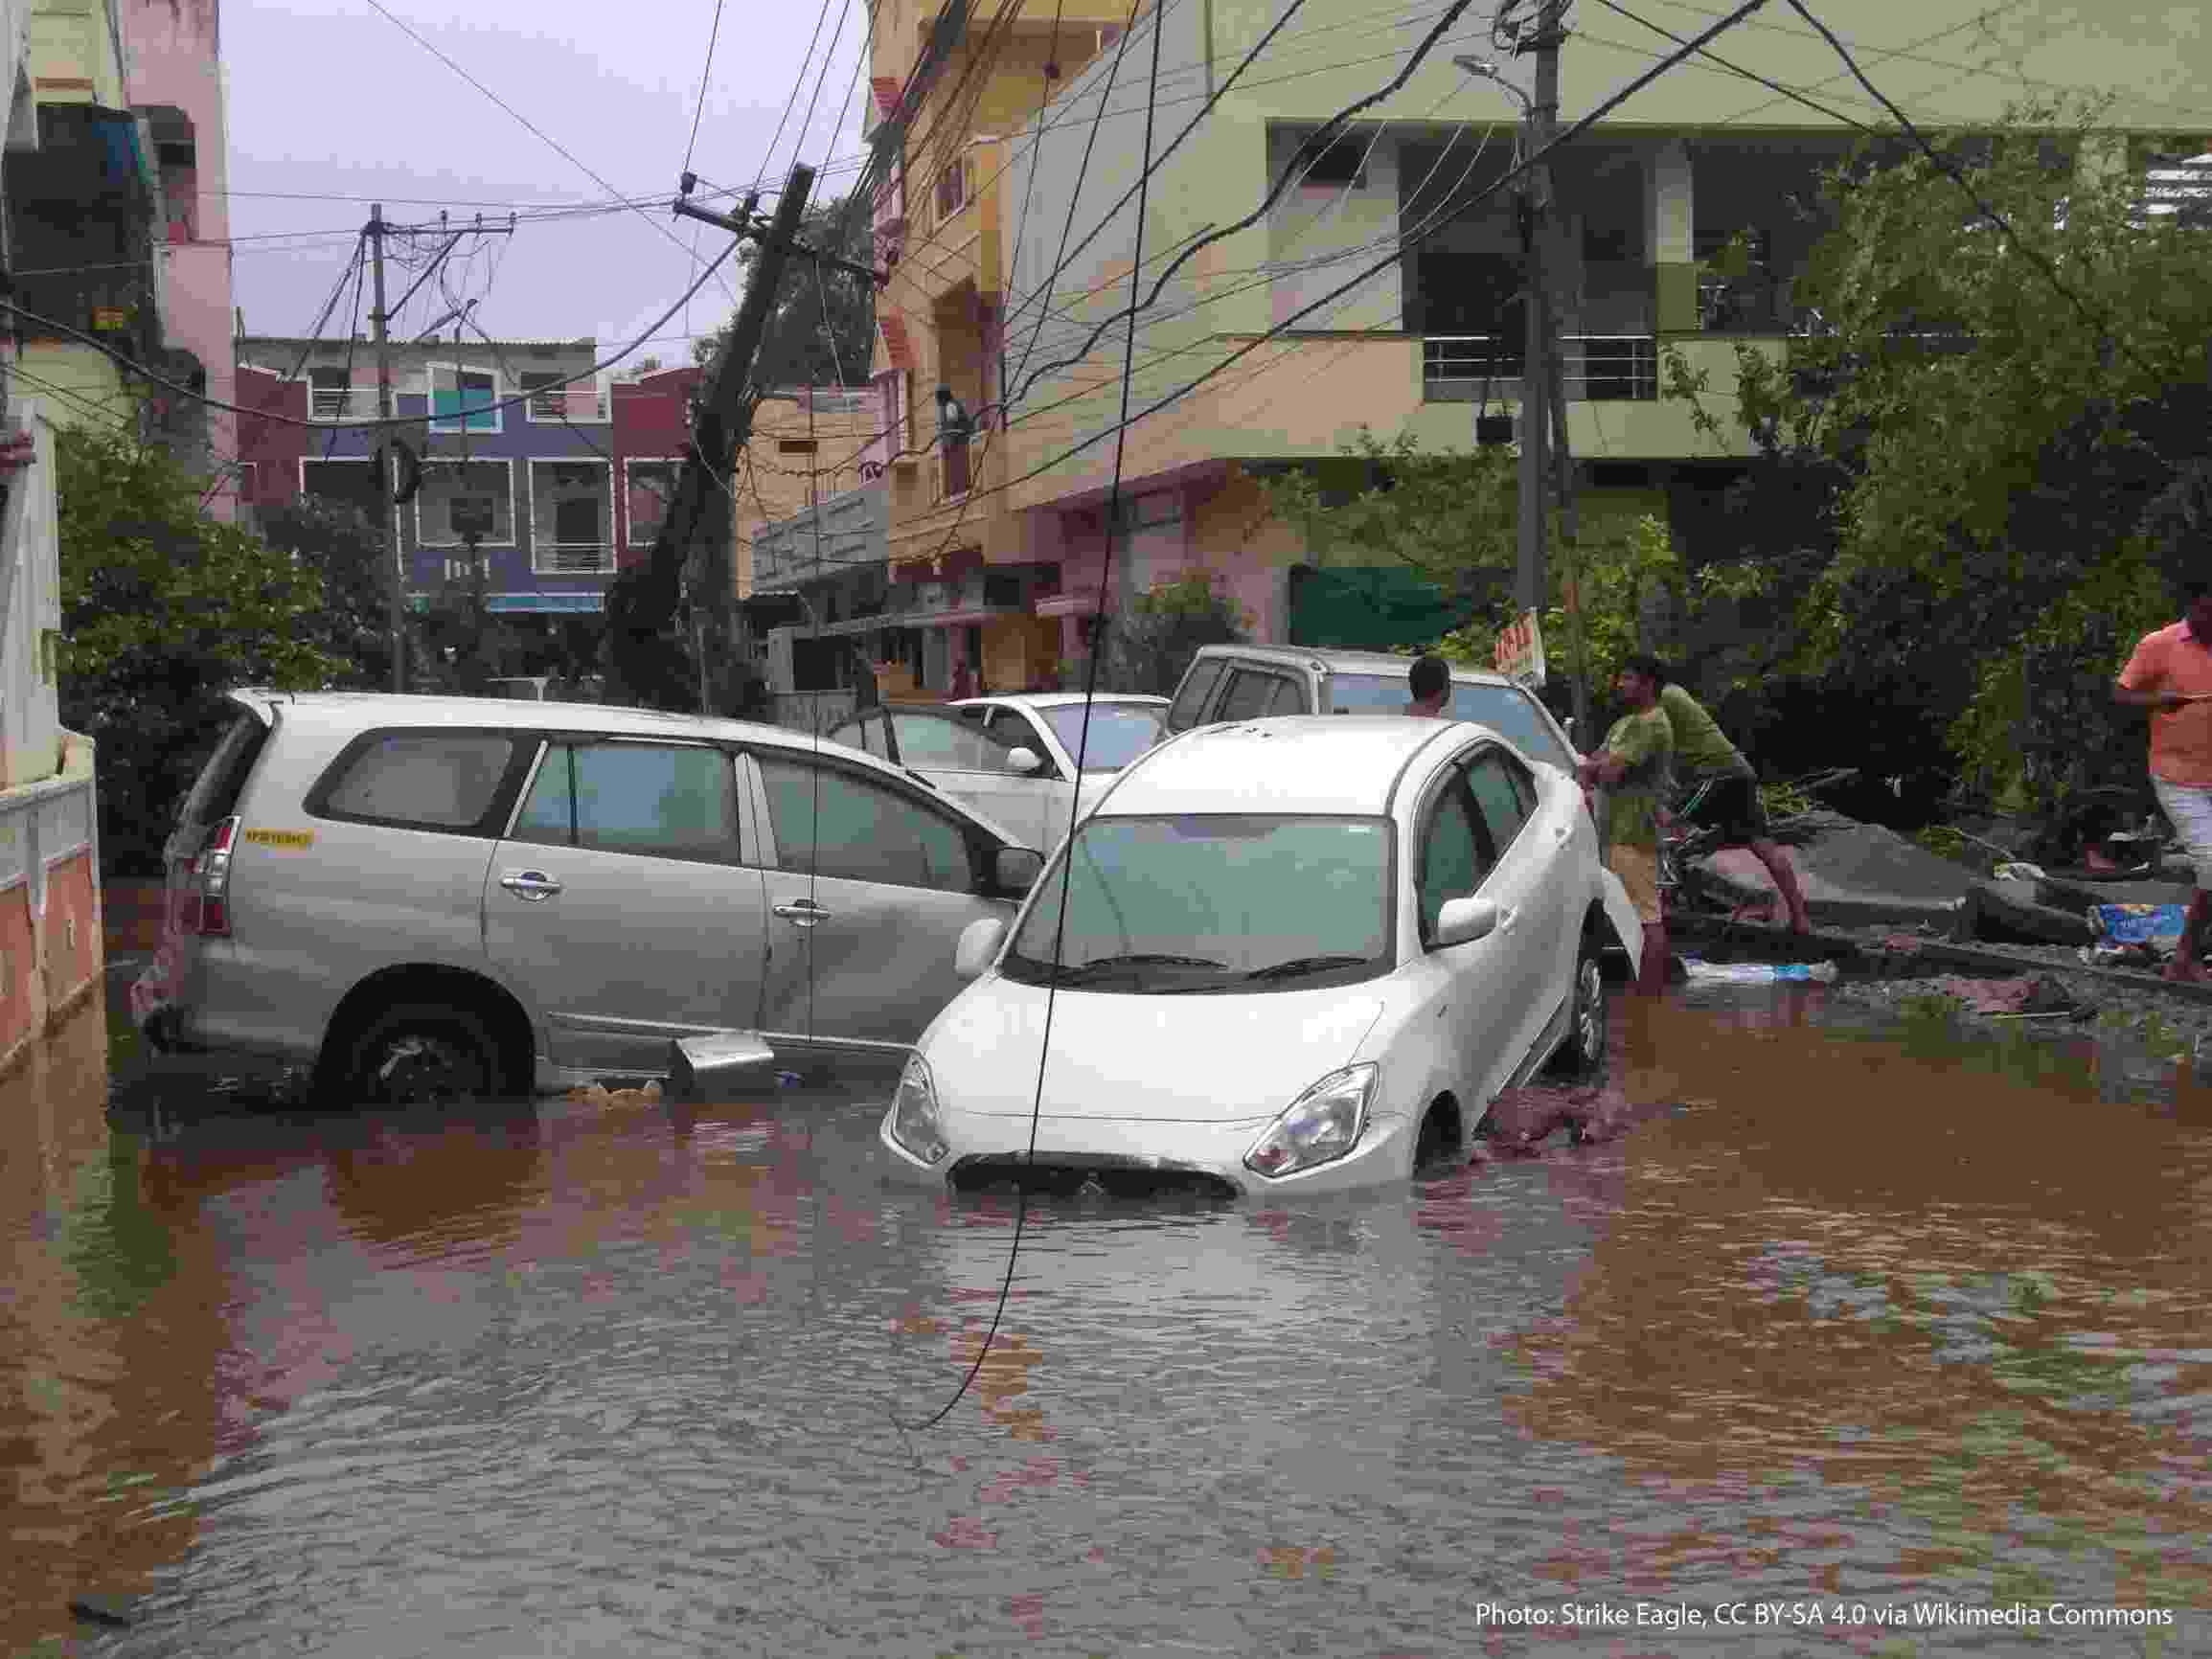 Several cars are partially submerged in flood waters in Hyderabad. The strength of the water has swept the cars down the street between houses, and damaged powerlines are visible behind.